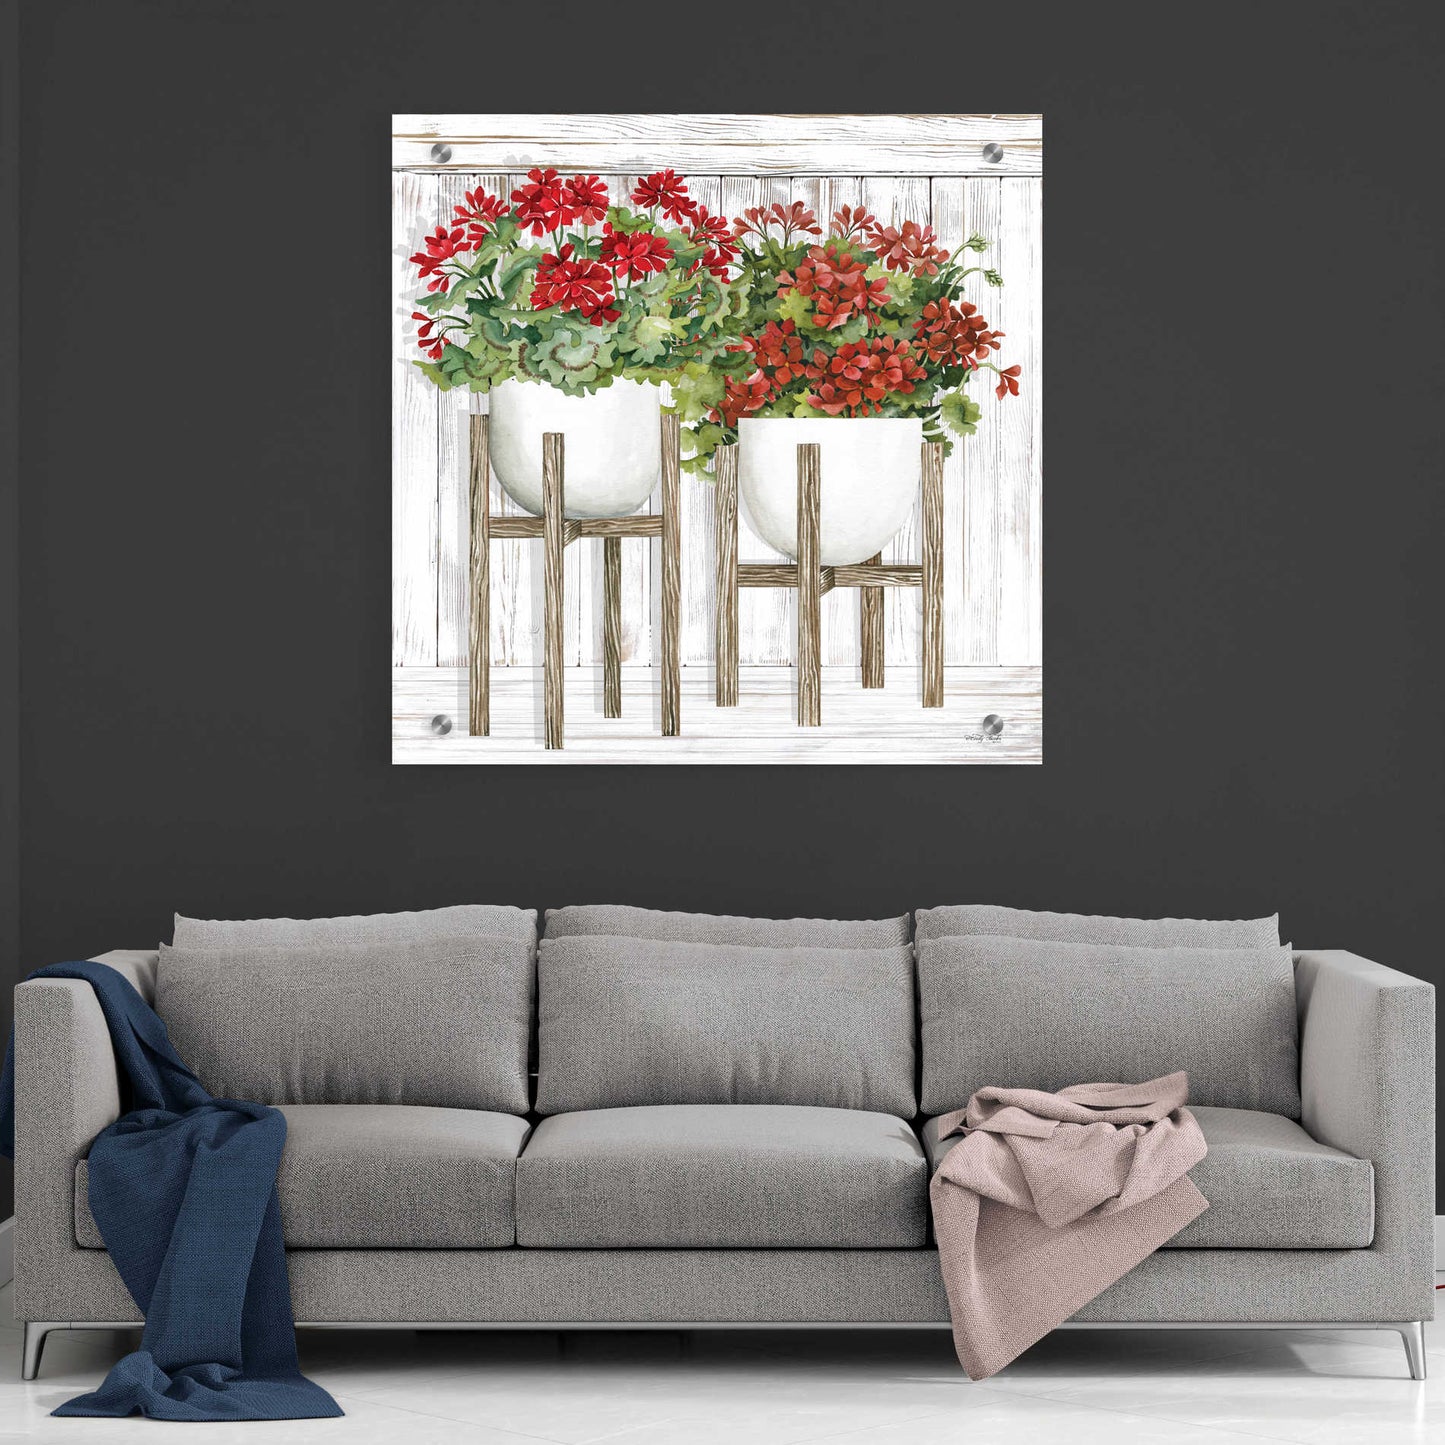 Epic Art 'Red Geraniums' by Cindy Jacobs, Acrylic Glass Wall Art,36x36